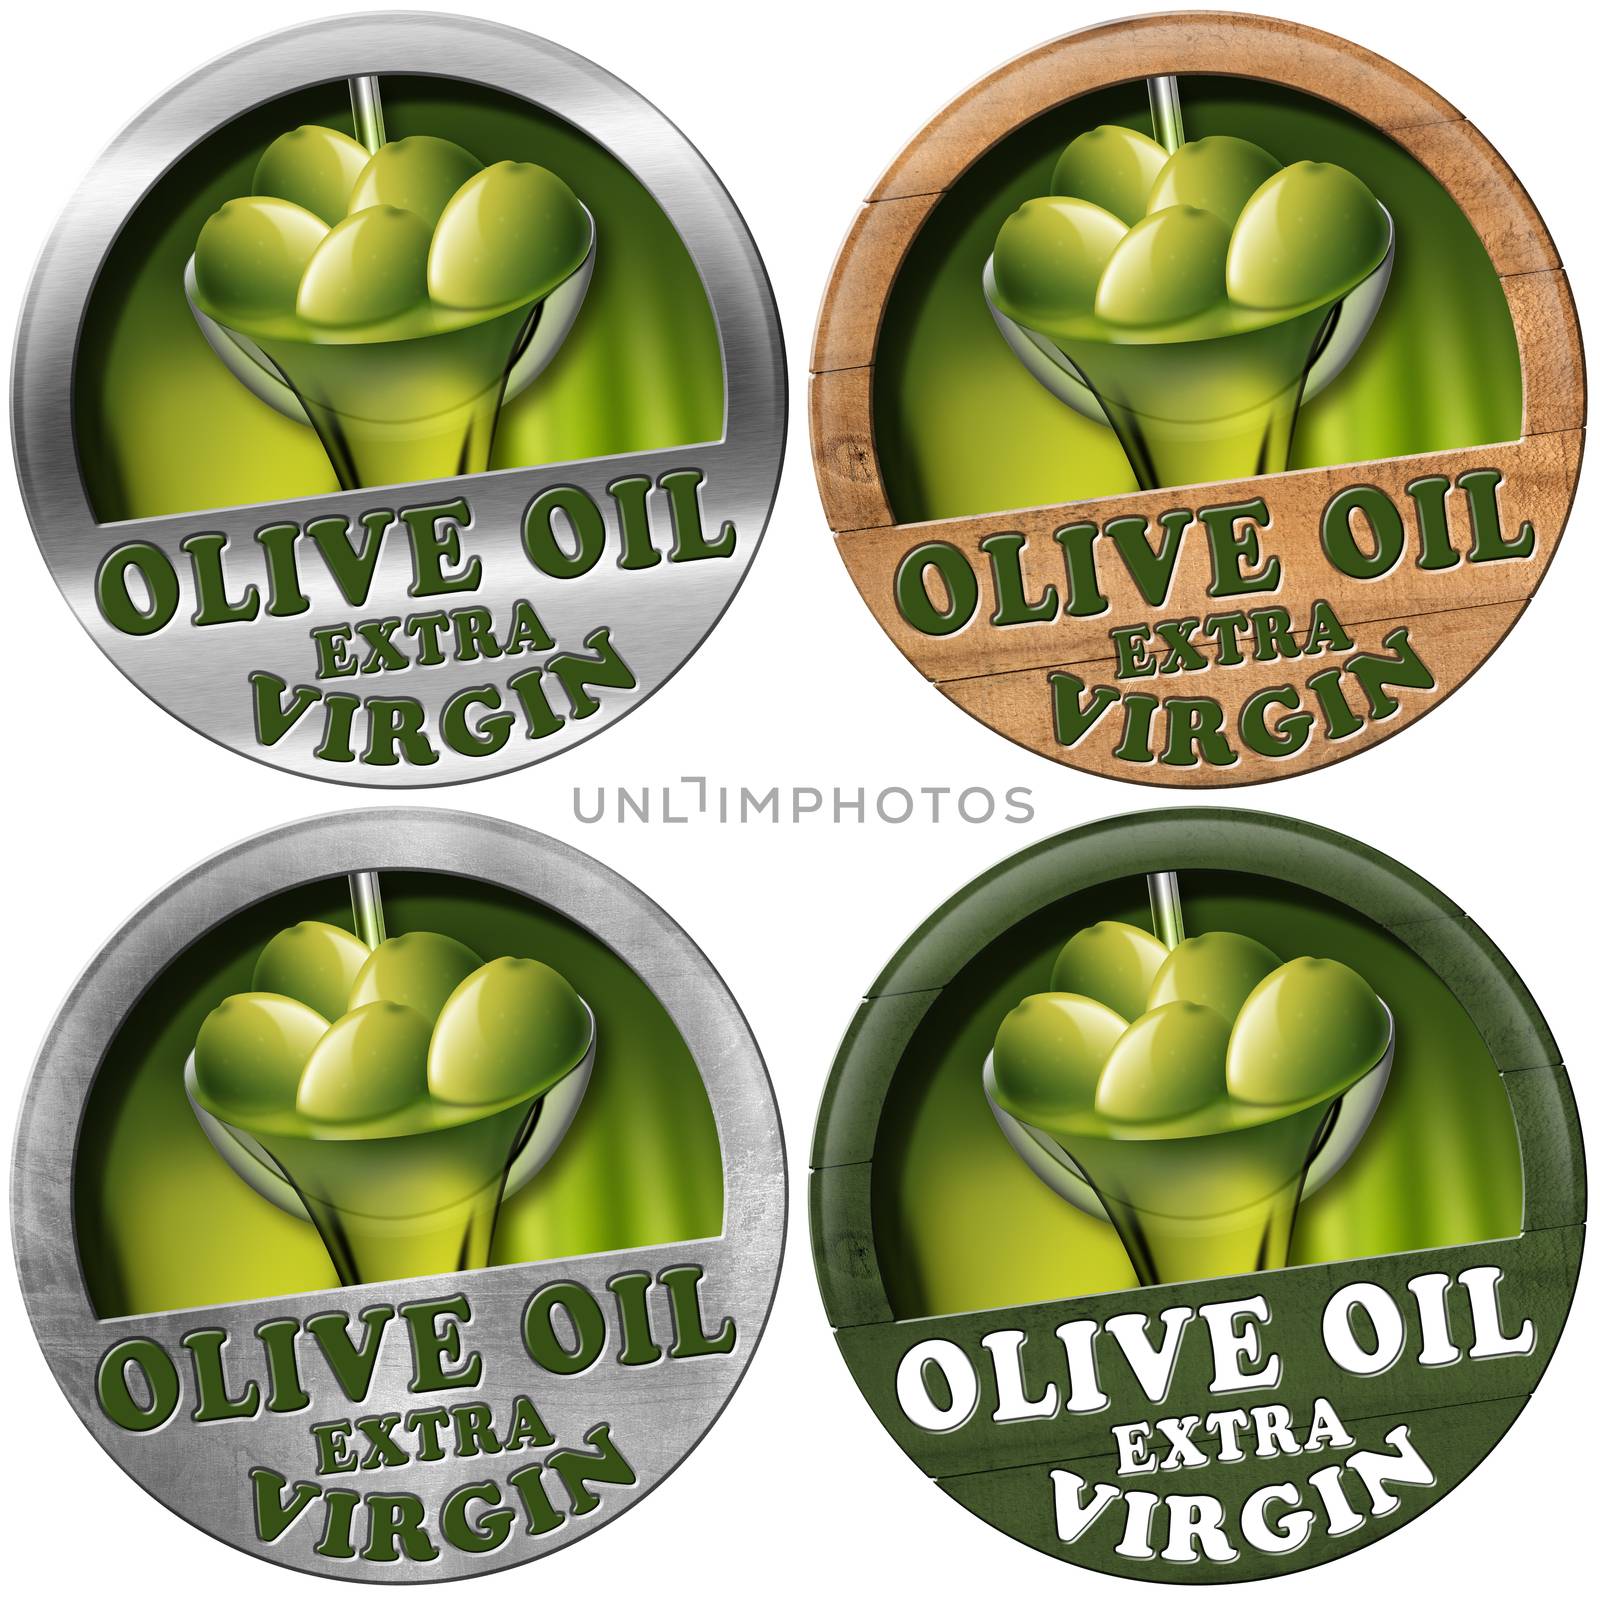 Collections of icons or symbol with green olives and oil, text Olive oil and Extra virgin. Isolated on white background